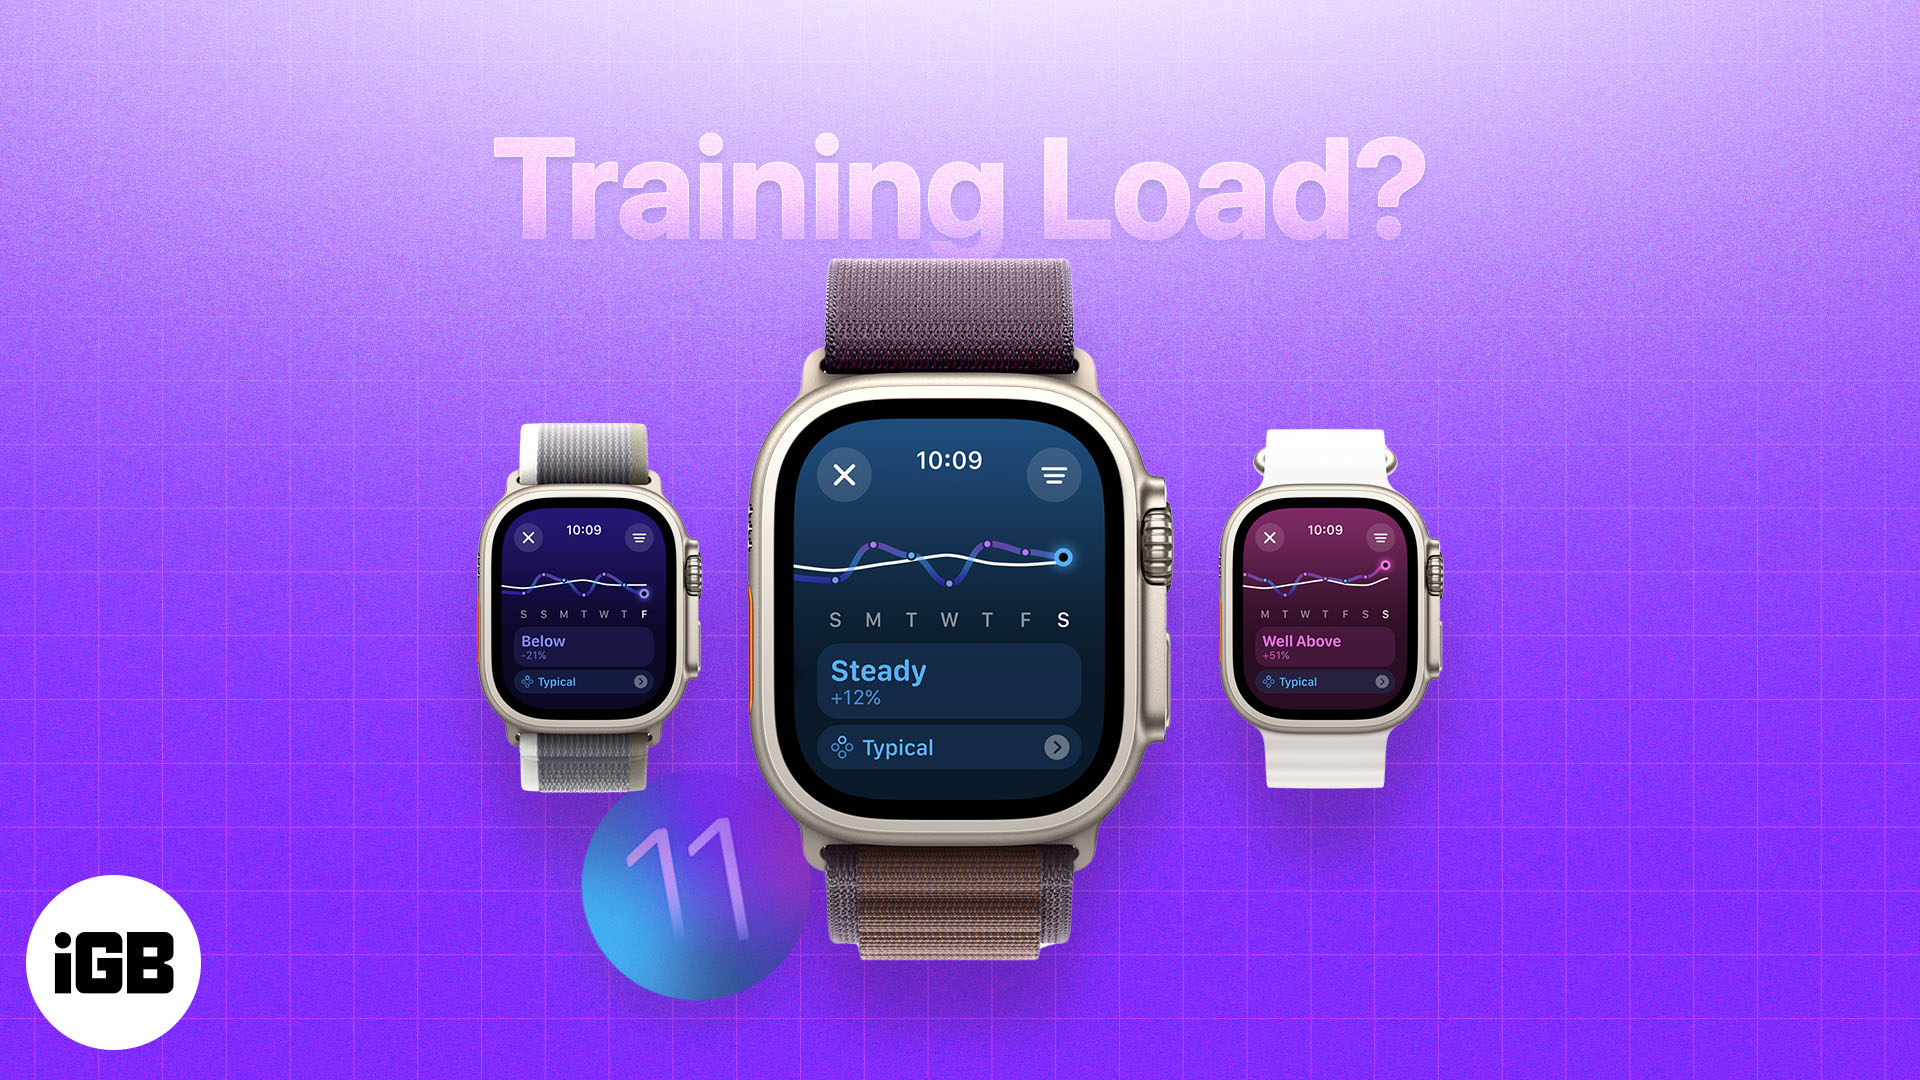 What is Training Load in watchOS 11 and how does it work? 